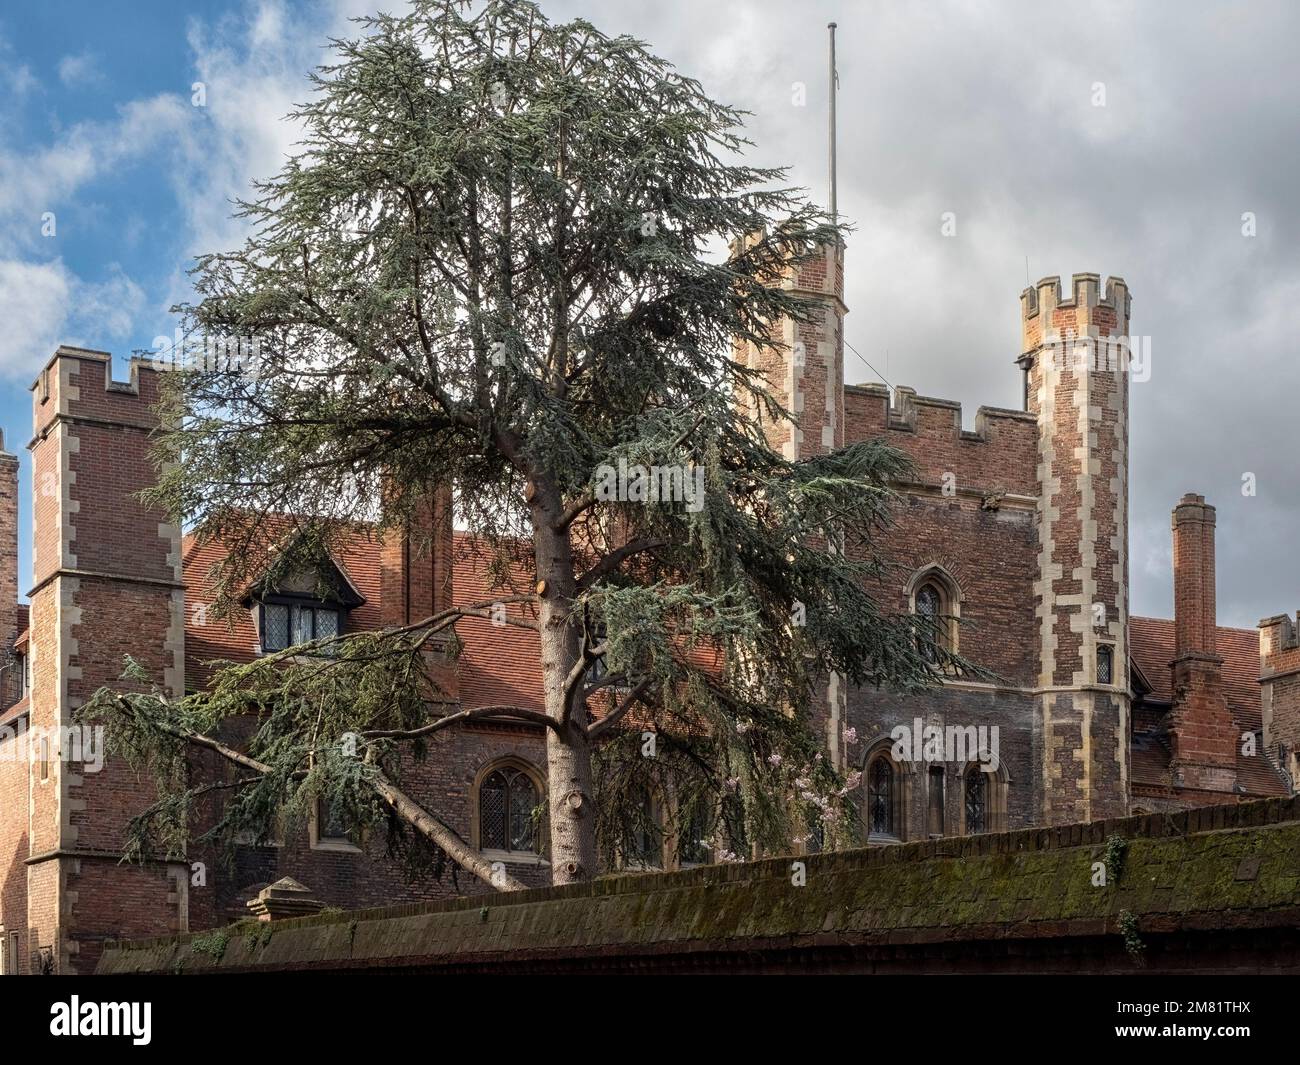 CAMBRIDGE, UK - MARCH 11, 2020:  Exterior view of Queens' College gatehouse in spring Stock Photo